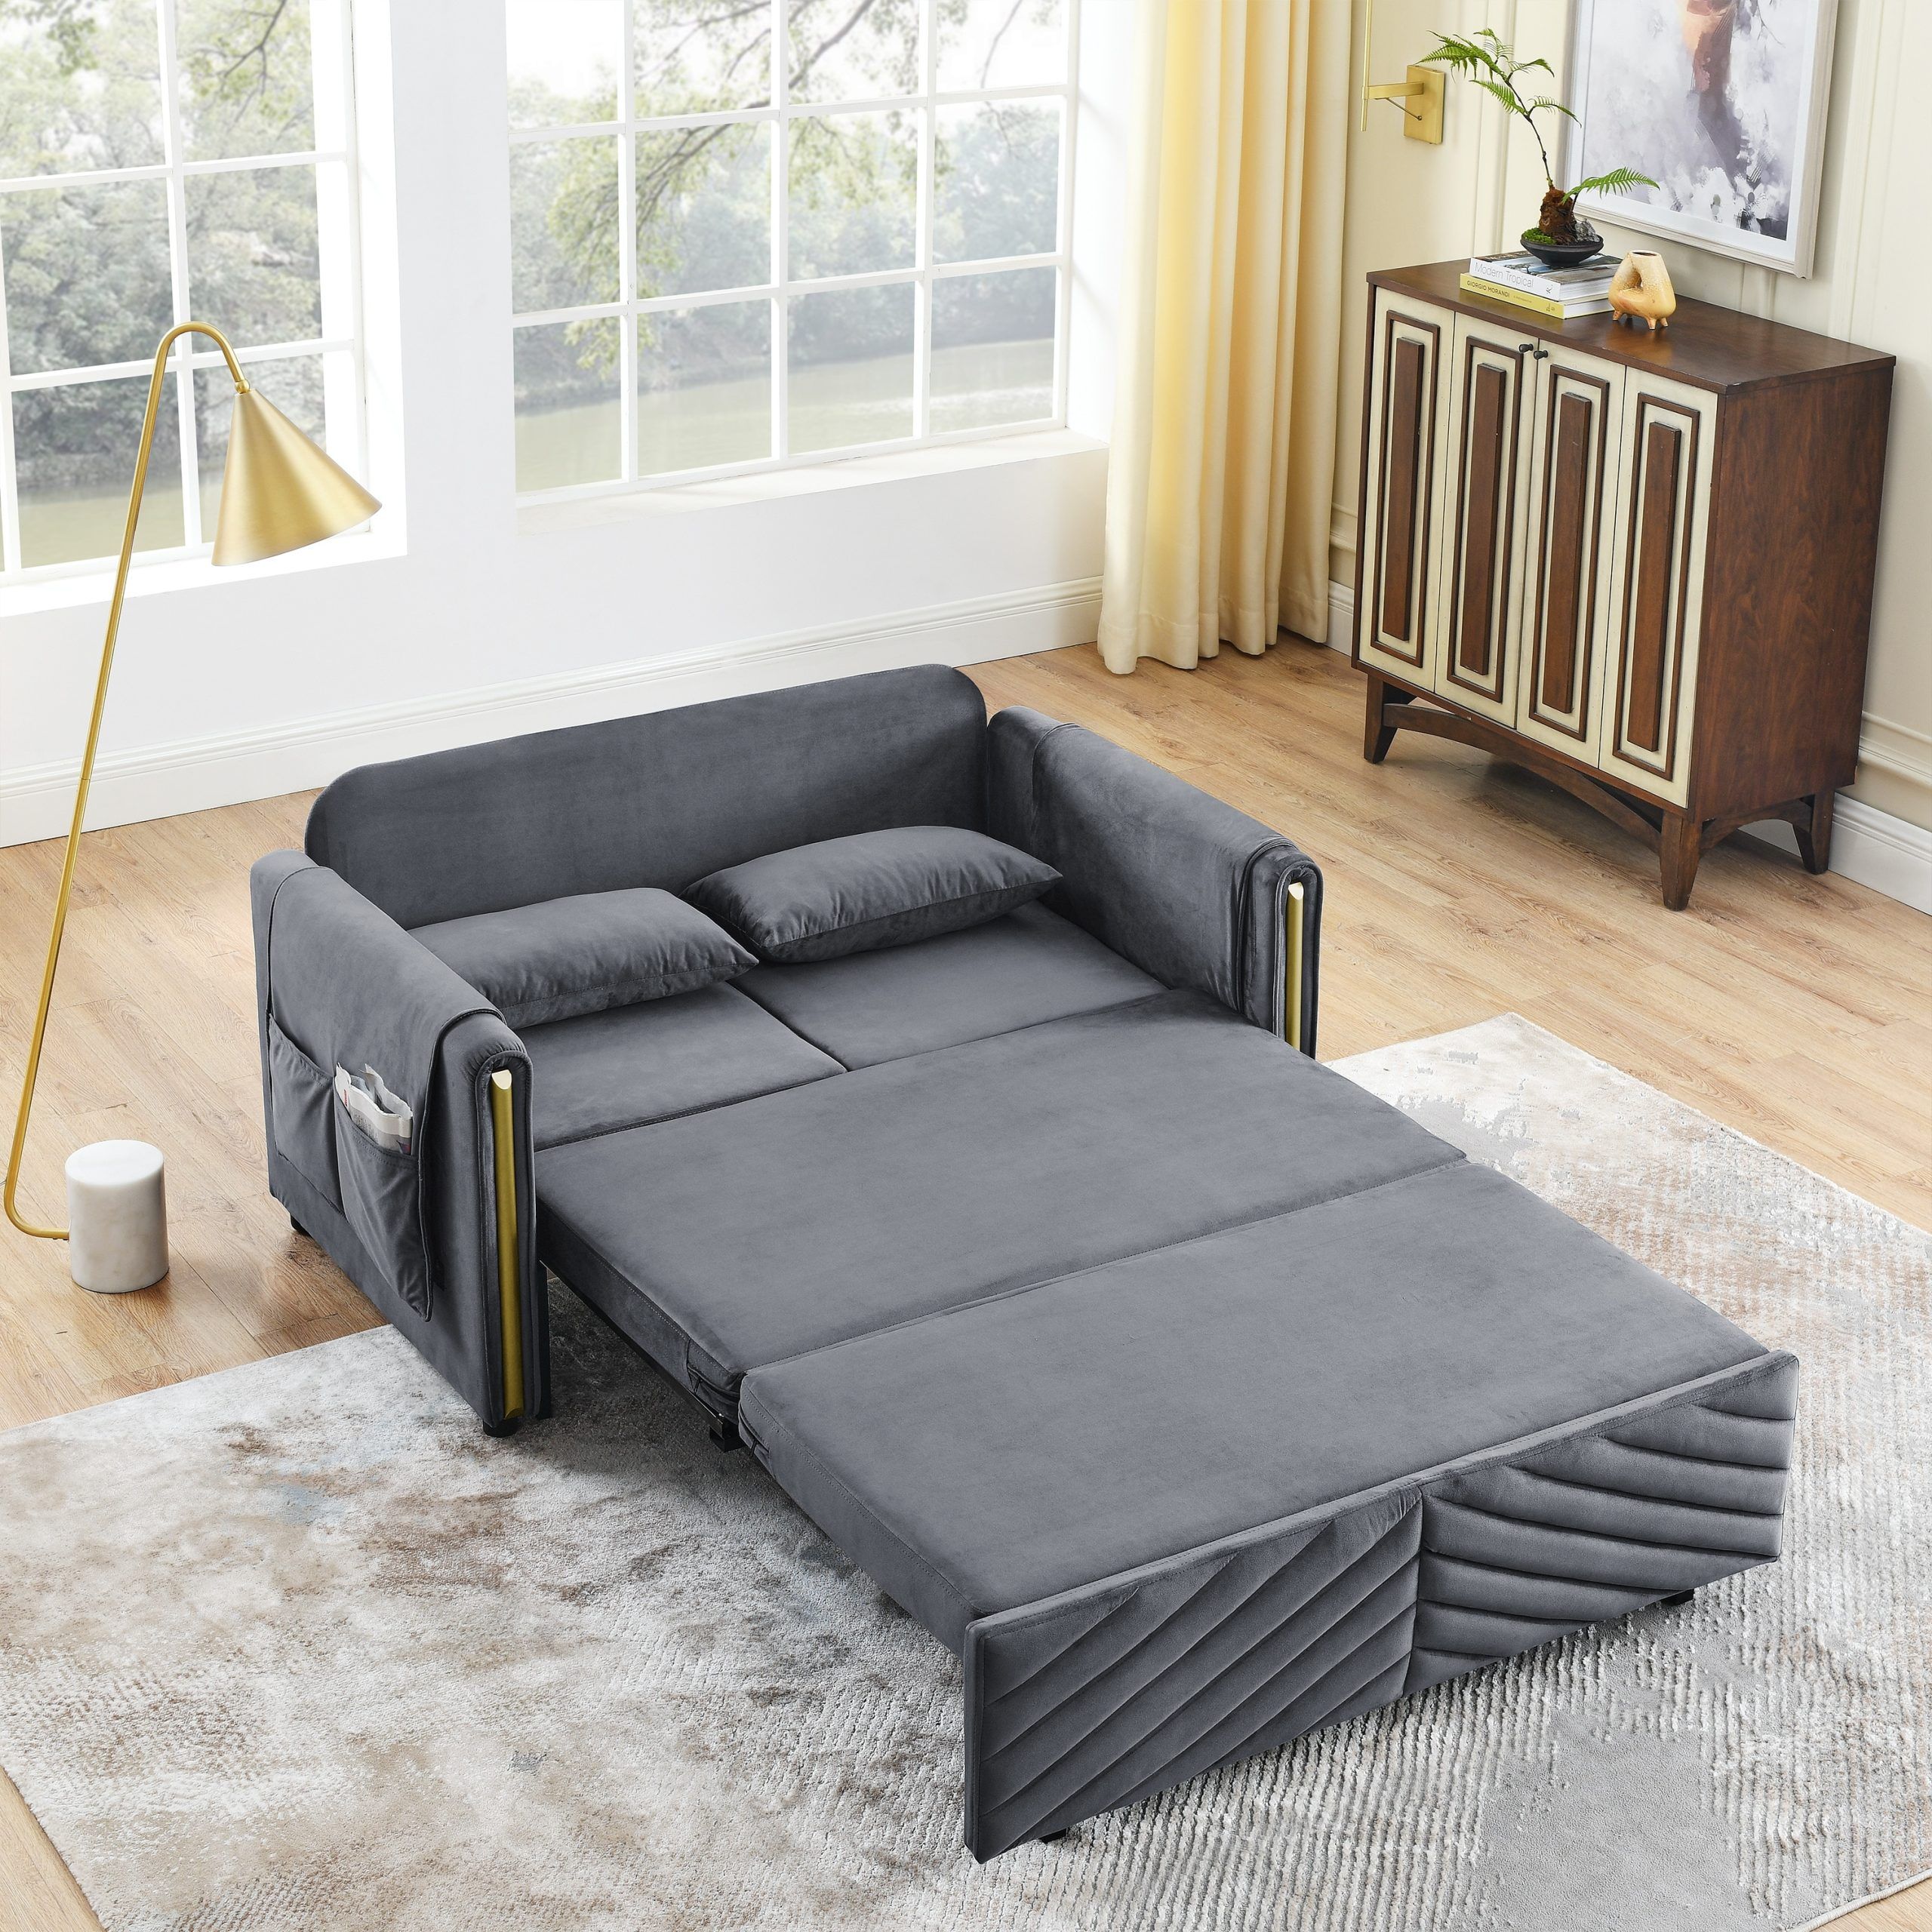 3 In 1 Convertible Sleeper Sofa Bed, 55" Multi Functional Pull Out Couch,  Velvet Loveseat Futon Bed W/2 Pillows & Storage Bags – Bed Bath & Beyond –  38908479 With Regard To 2 In 1 Gray Pull Out Sofa Beds (View 6 of 15)